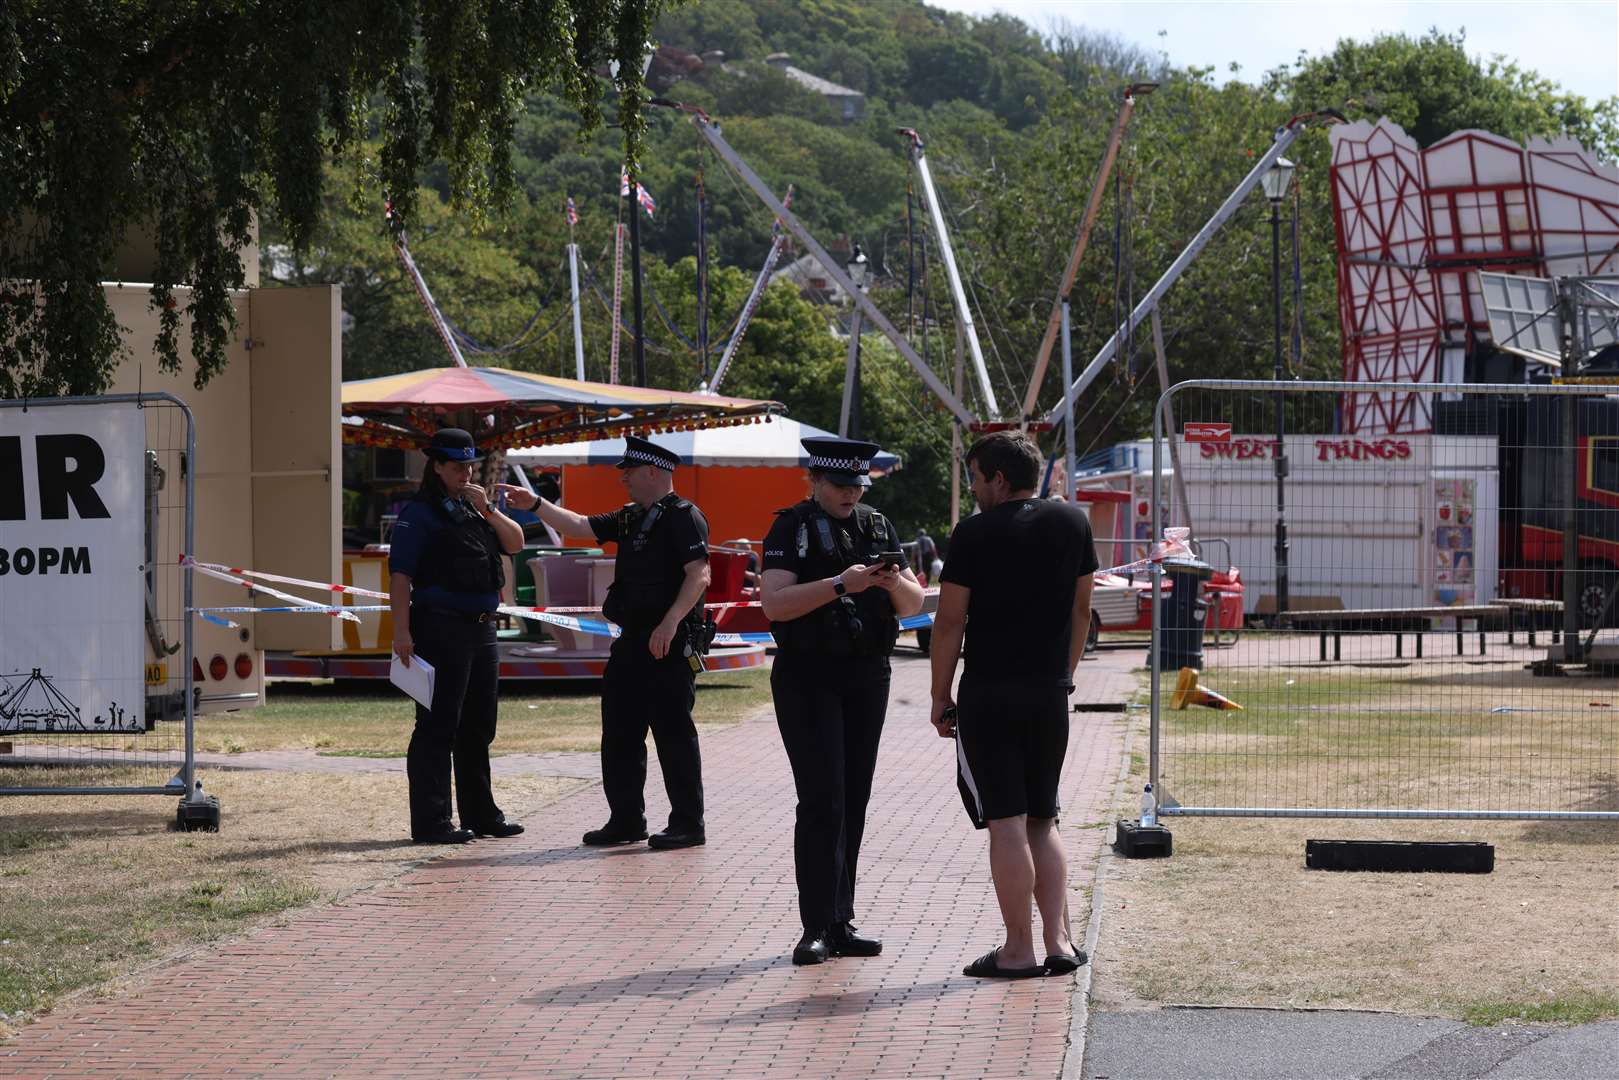 The funfair in Pencester Gardens was closed off yesterday. Photo: UKNIP